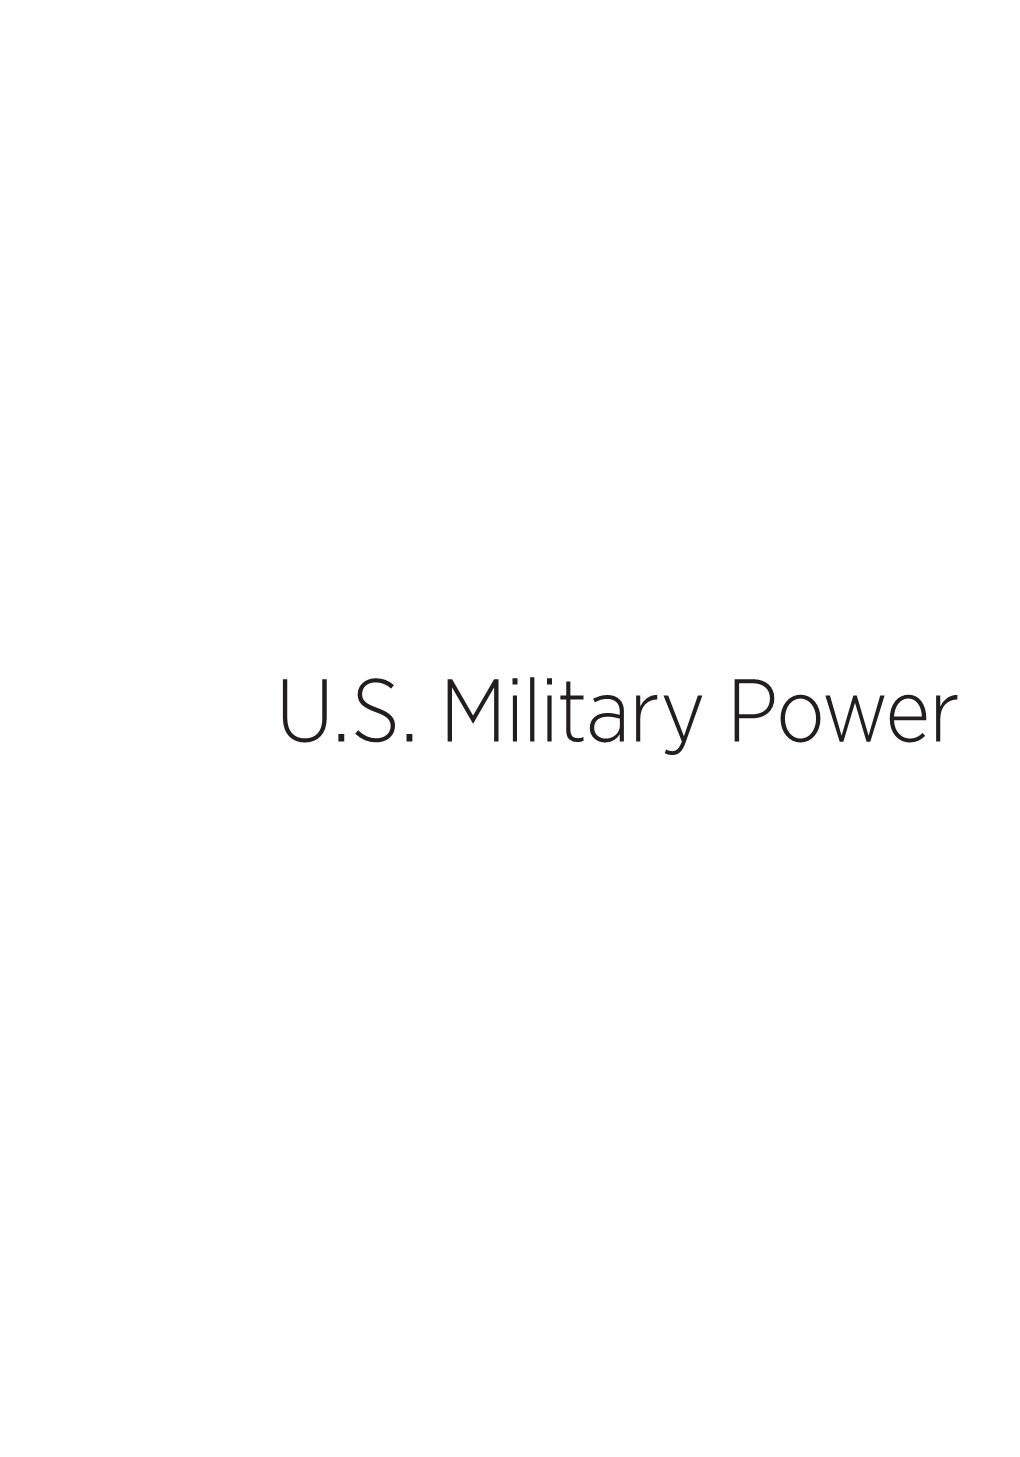 An Assessment of US Military Power